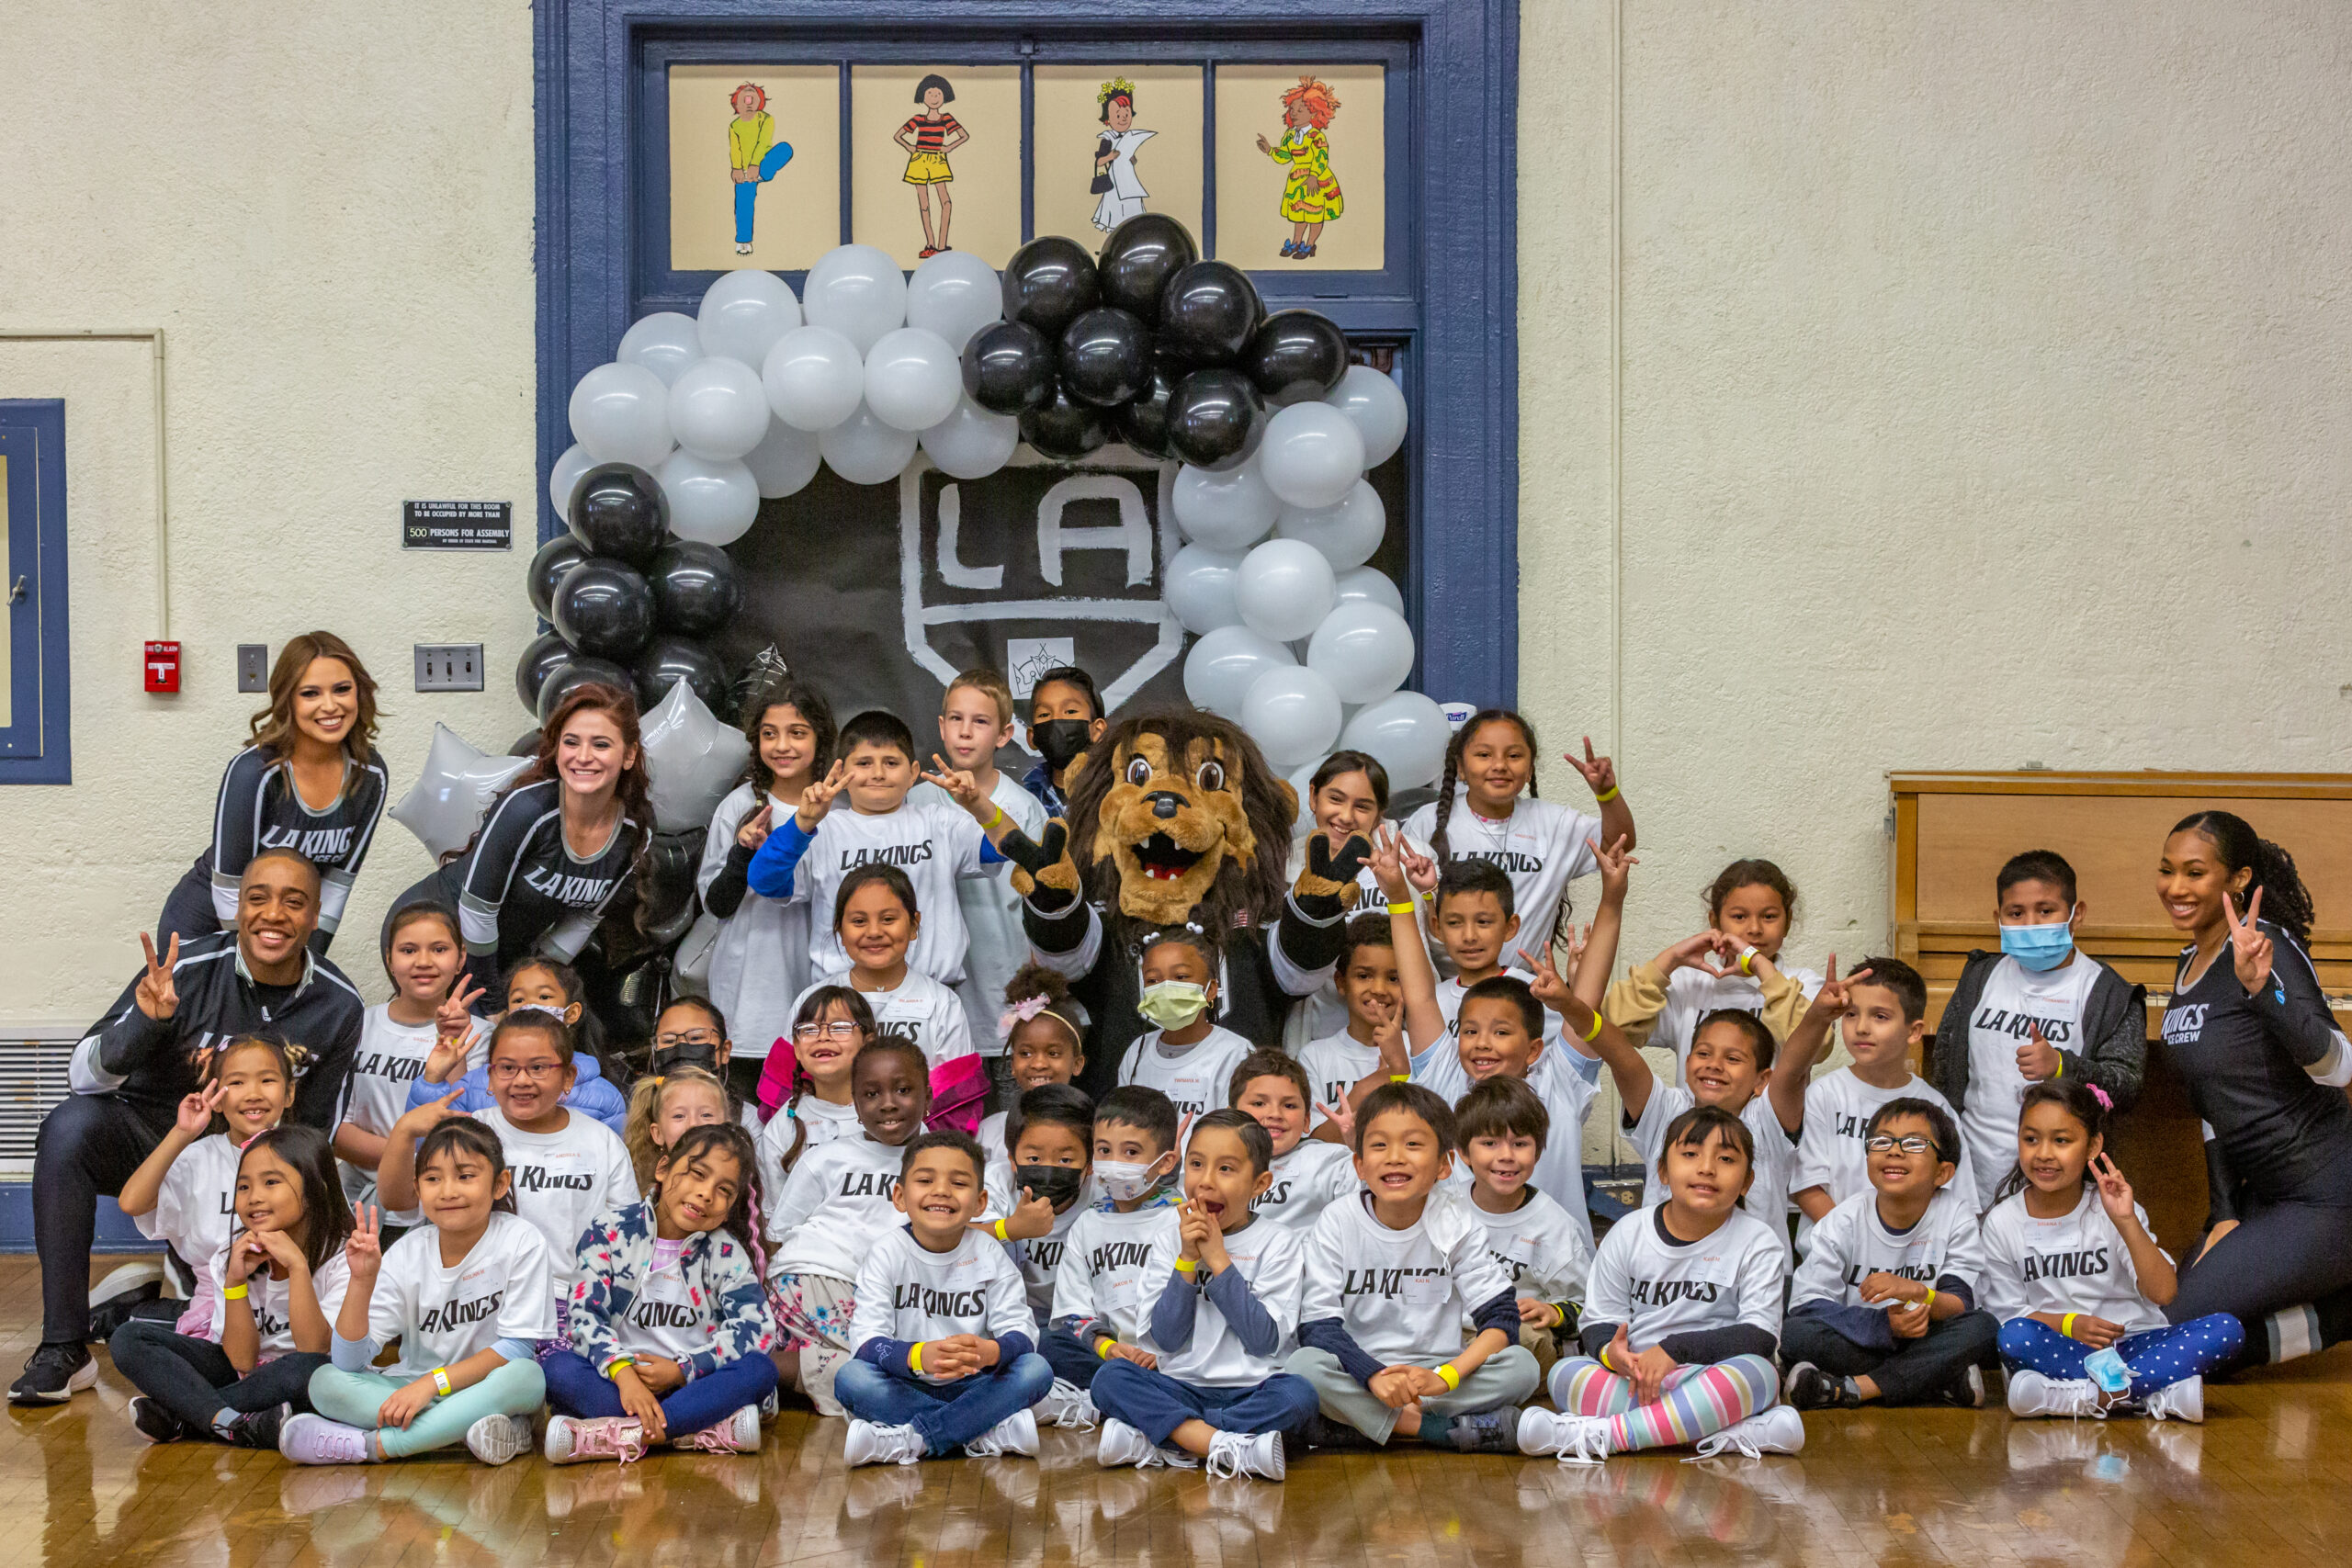 LA Kings Bring New Shoes and Hockey to 420 Kids in LA